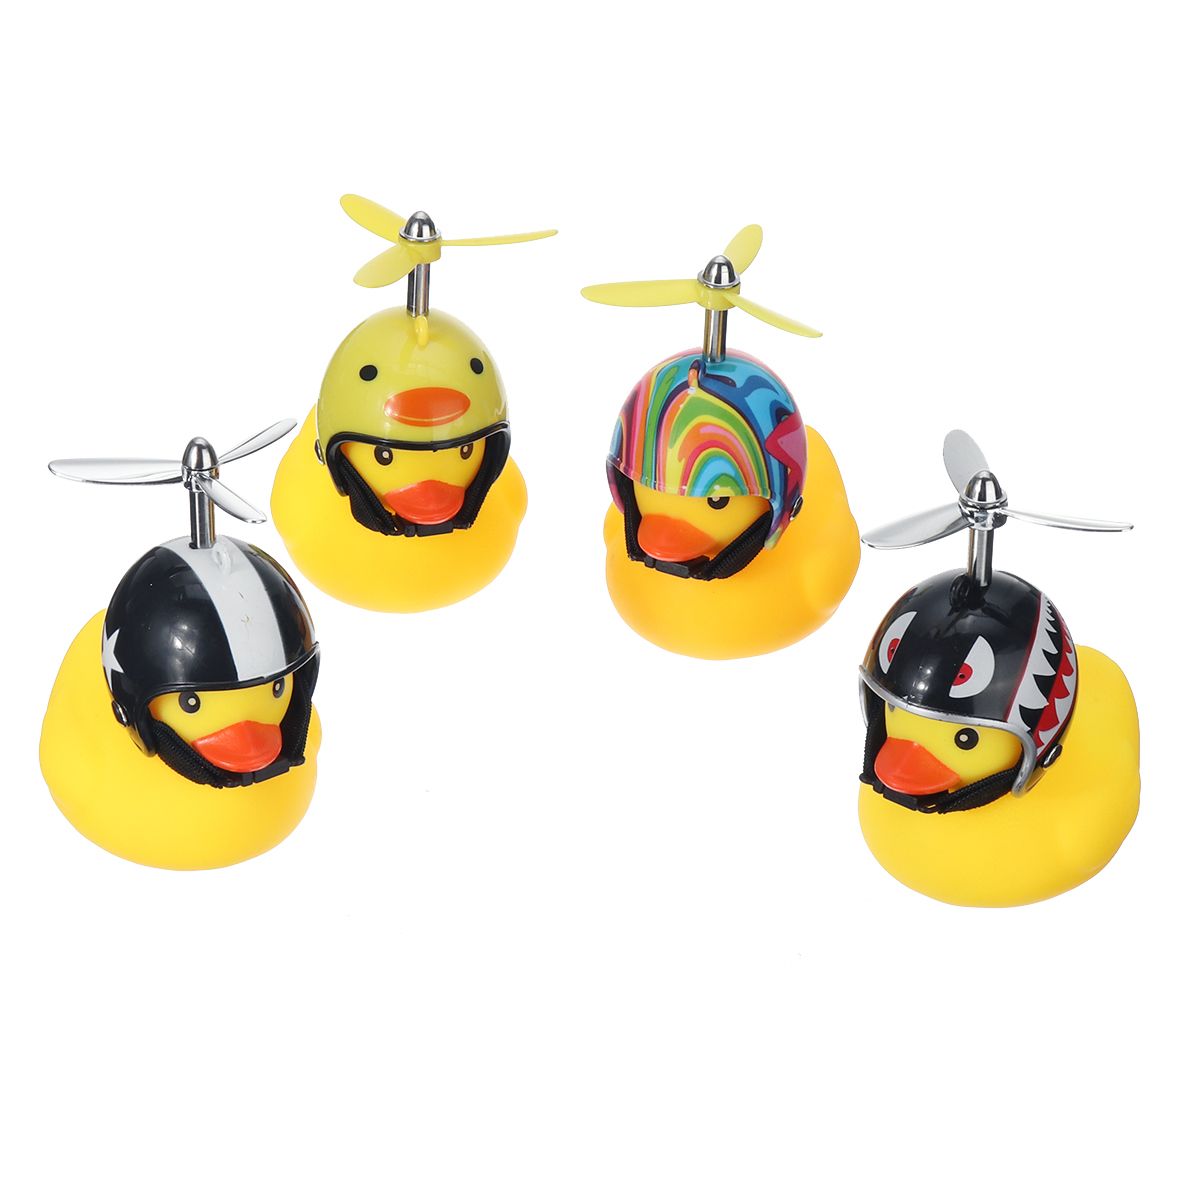 Car-LED-Decoration-Light-Little-Yellow-Duck-Wearing-Helmet-Safety-Warning-Lights-With-Remote-Control-1629178